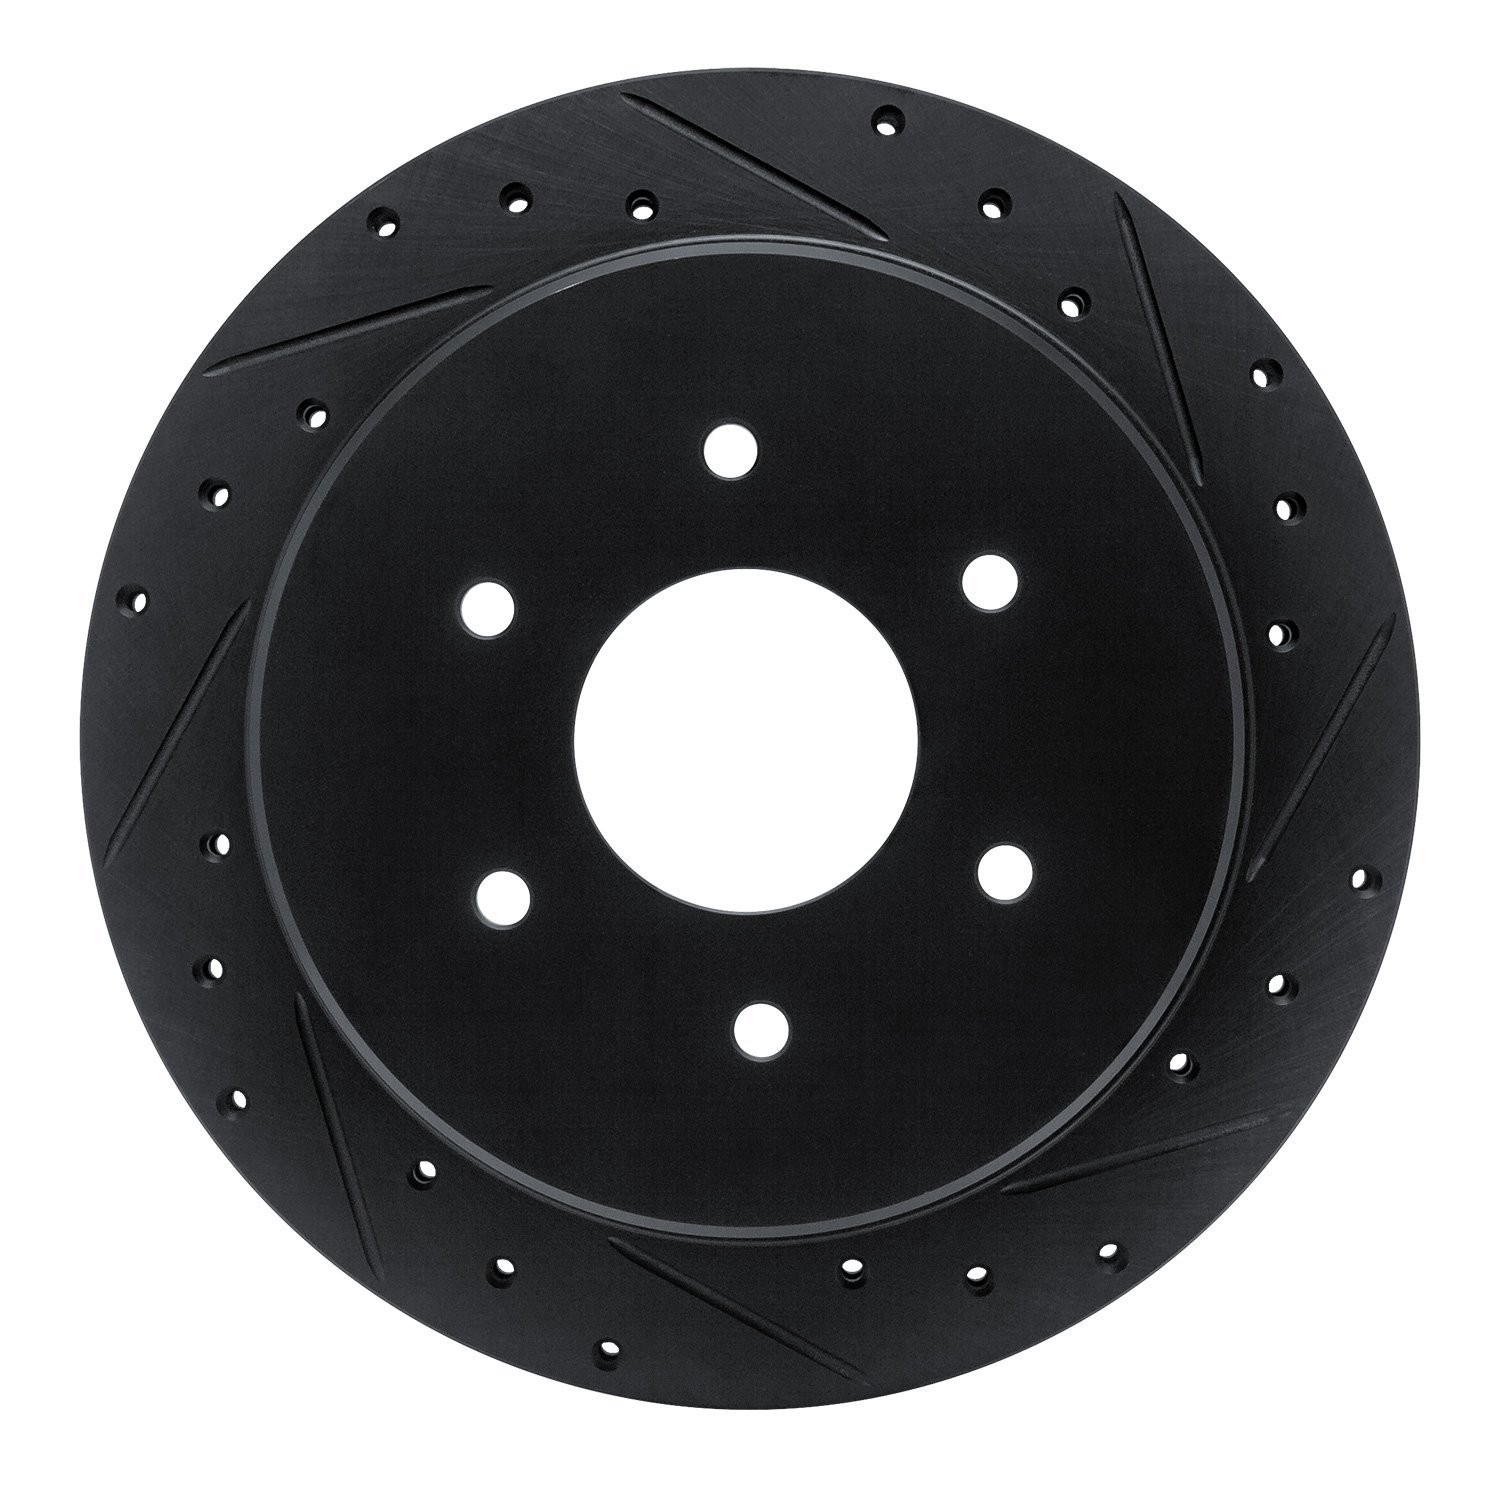 E-Line Drilled & Slotted Black Brake Rotor, Fits Select Infiniti/Nissan, Position: Rear Right